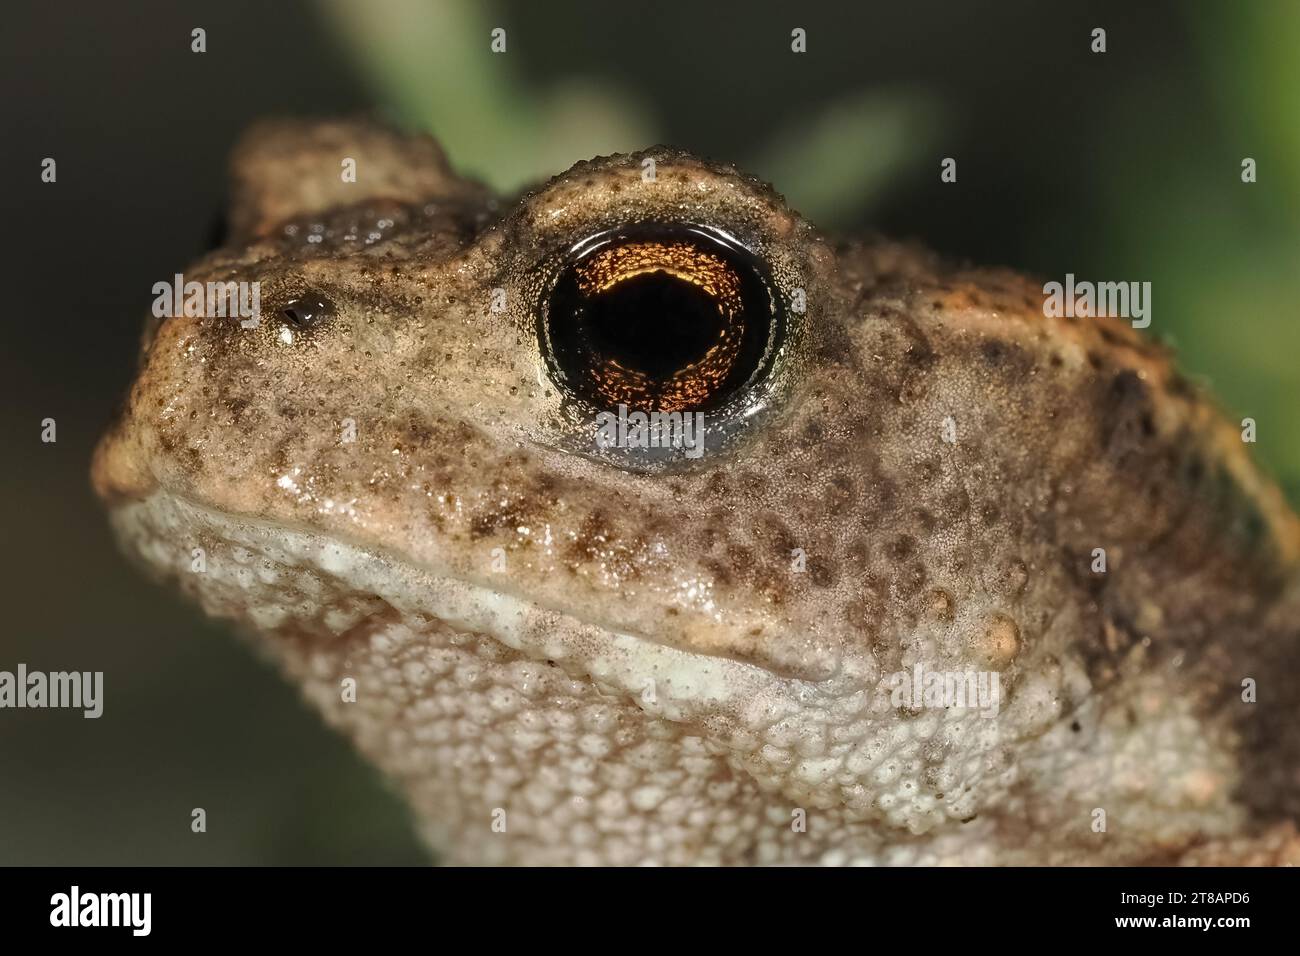 European toad (Bufo bufo) in its natural environment Stock Photo